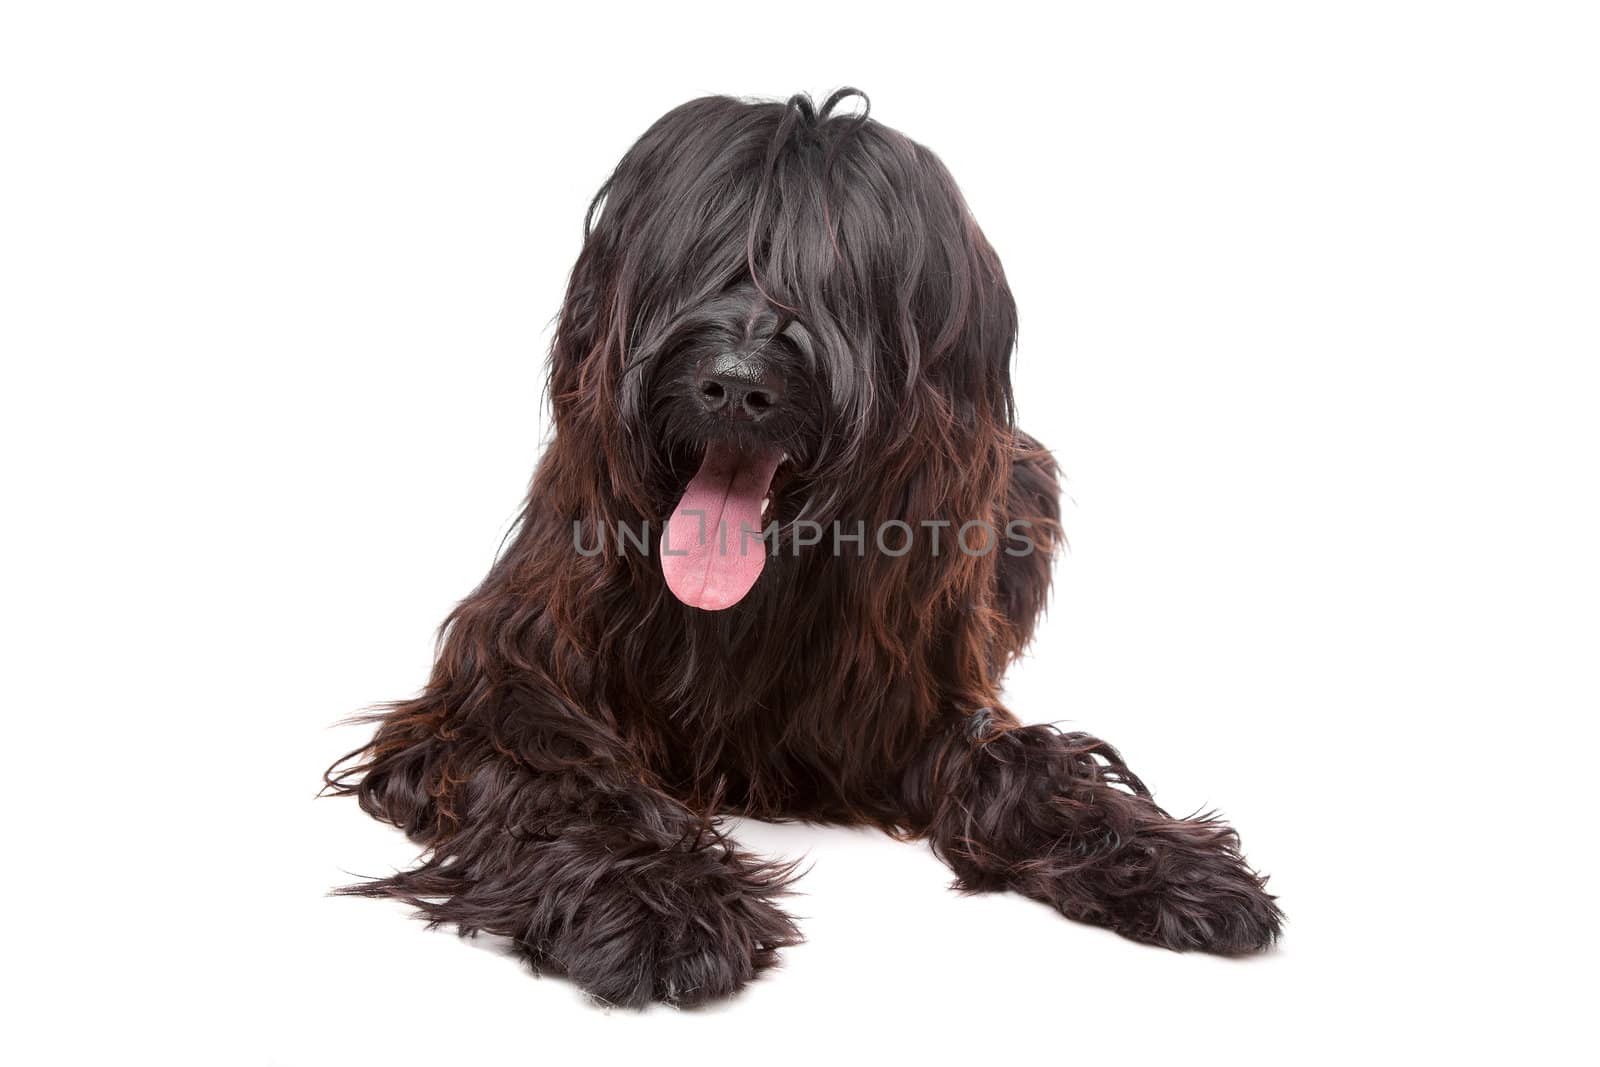 Briard dog in front of a white background